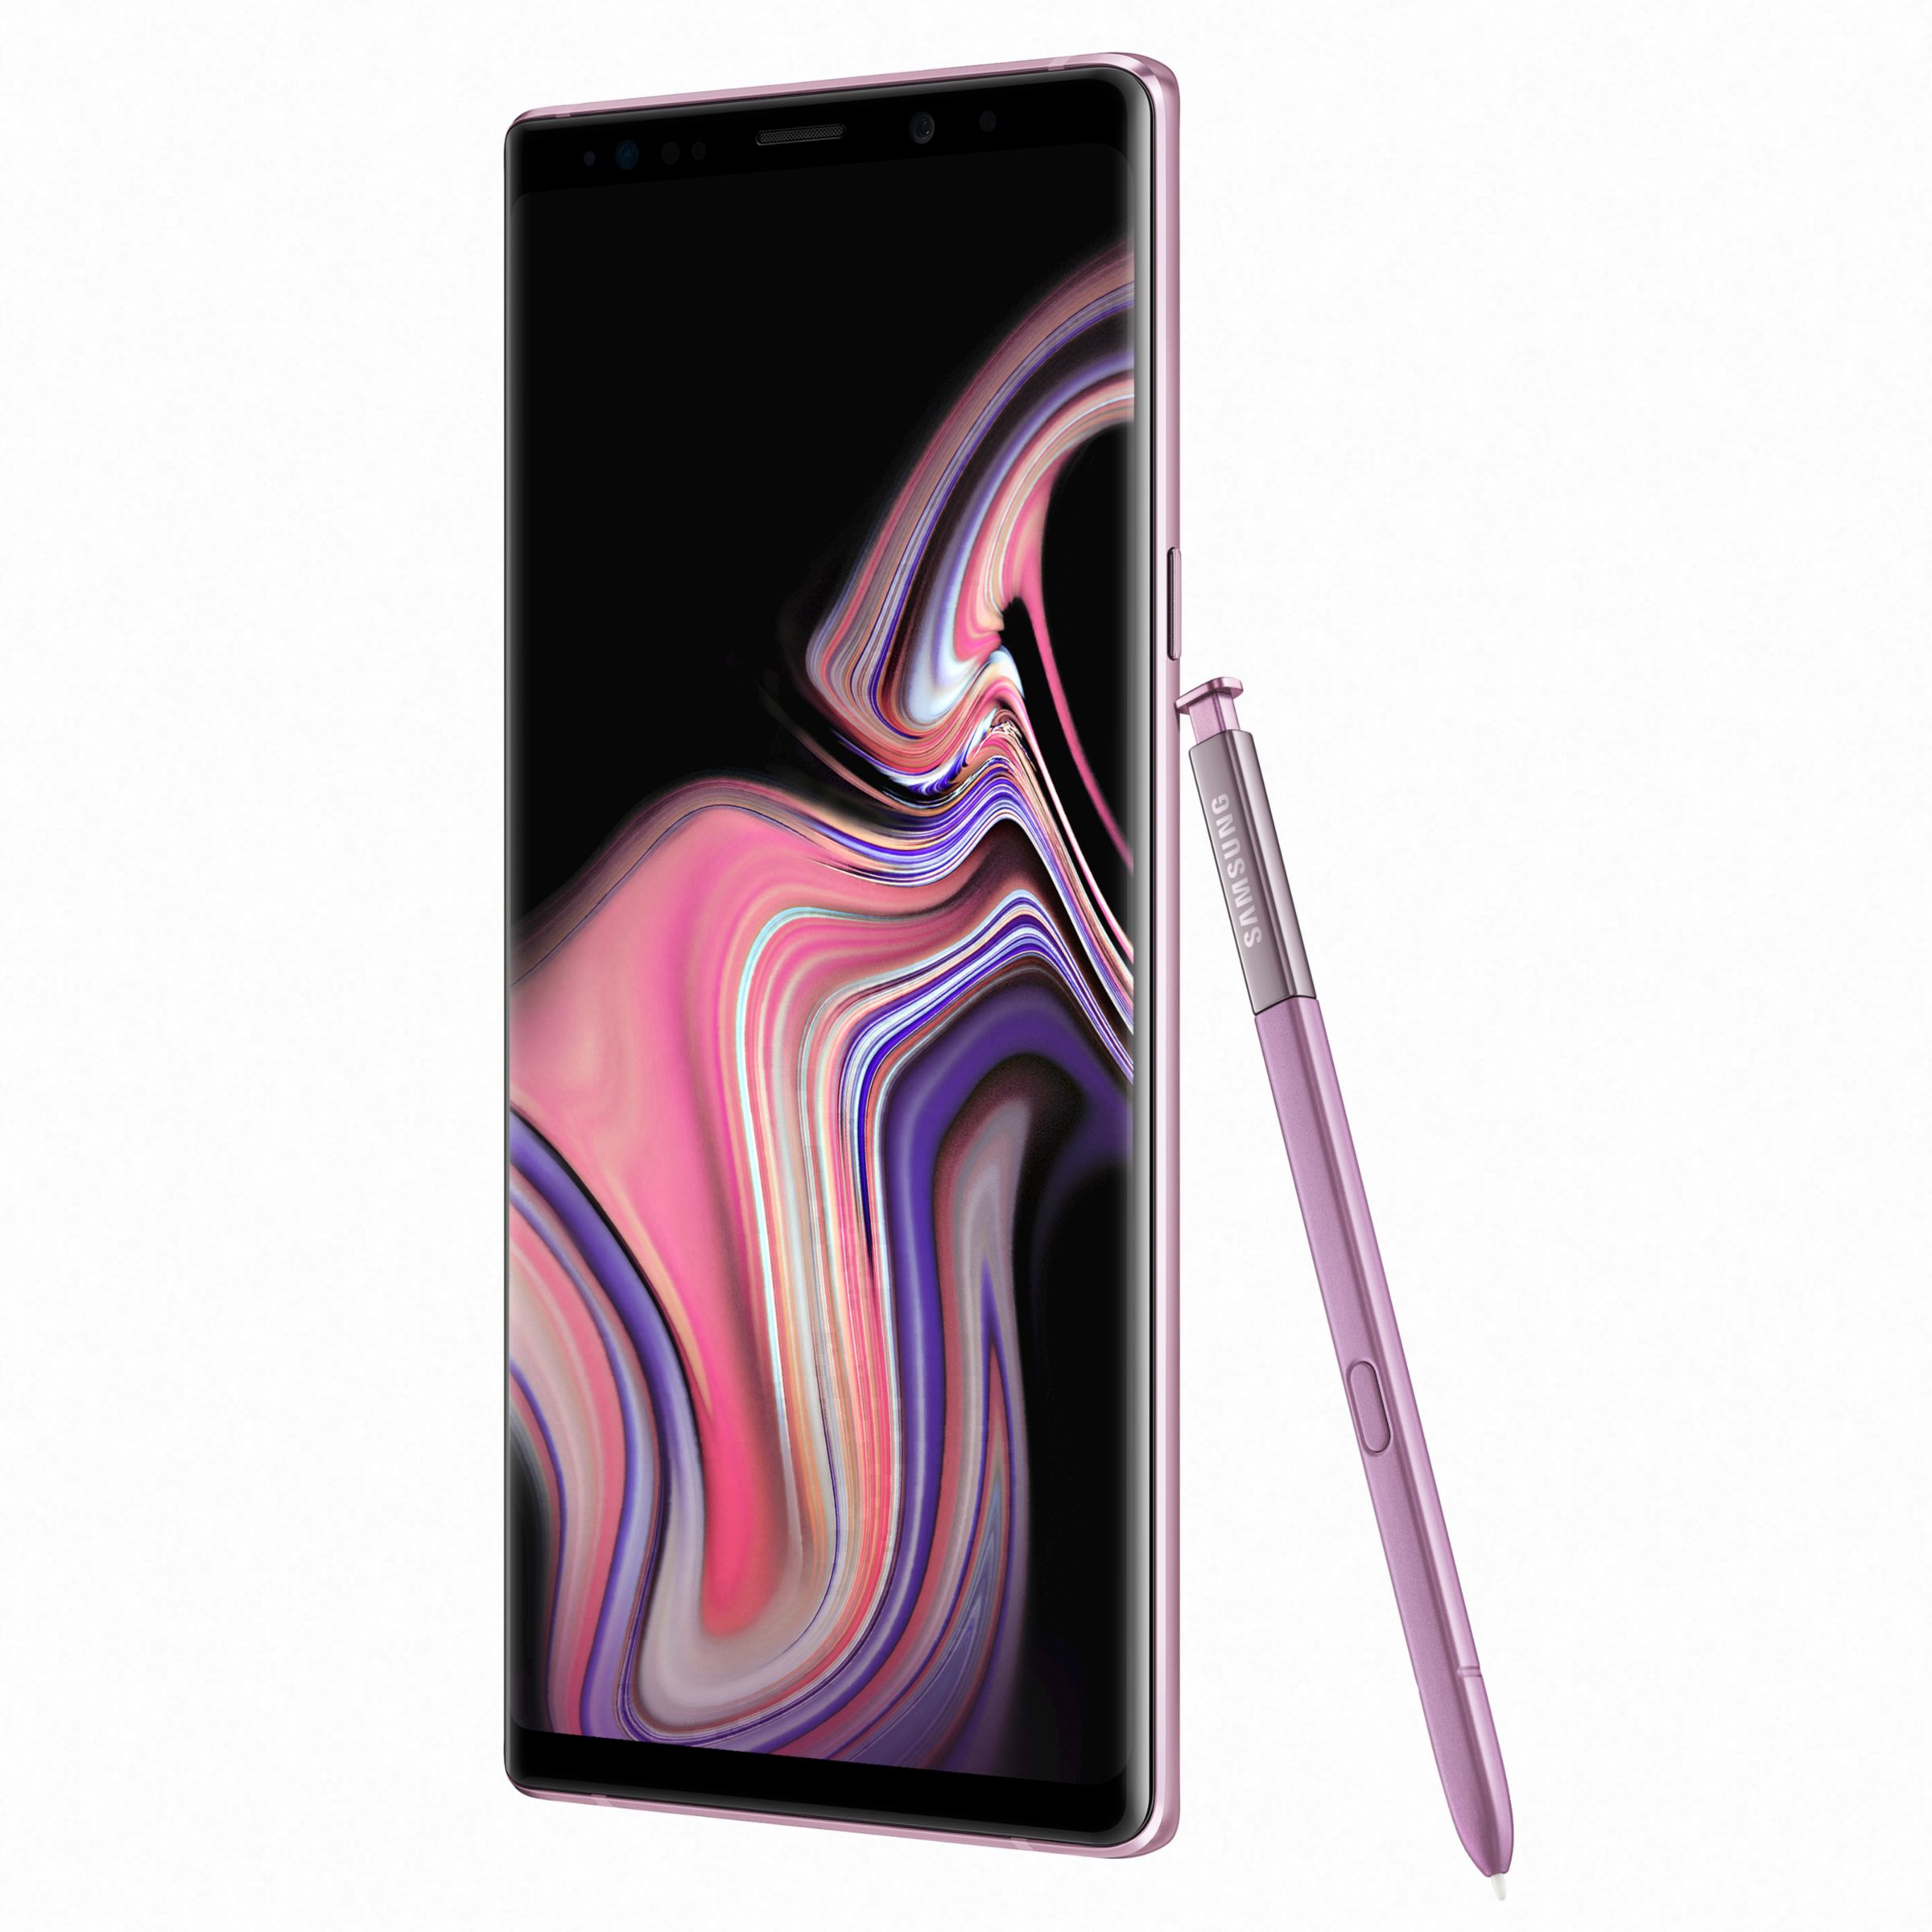 Samsung Galaxy Note9 Smartphone with S Pen, Android, 6.4", 4G LTE, SIM